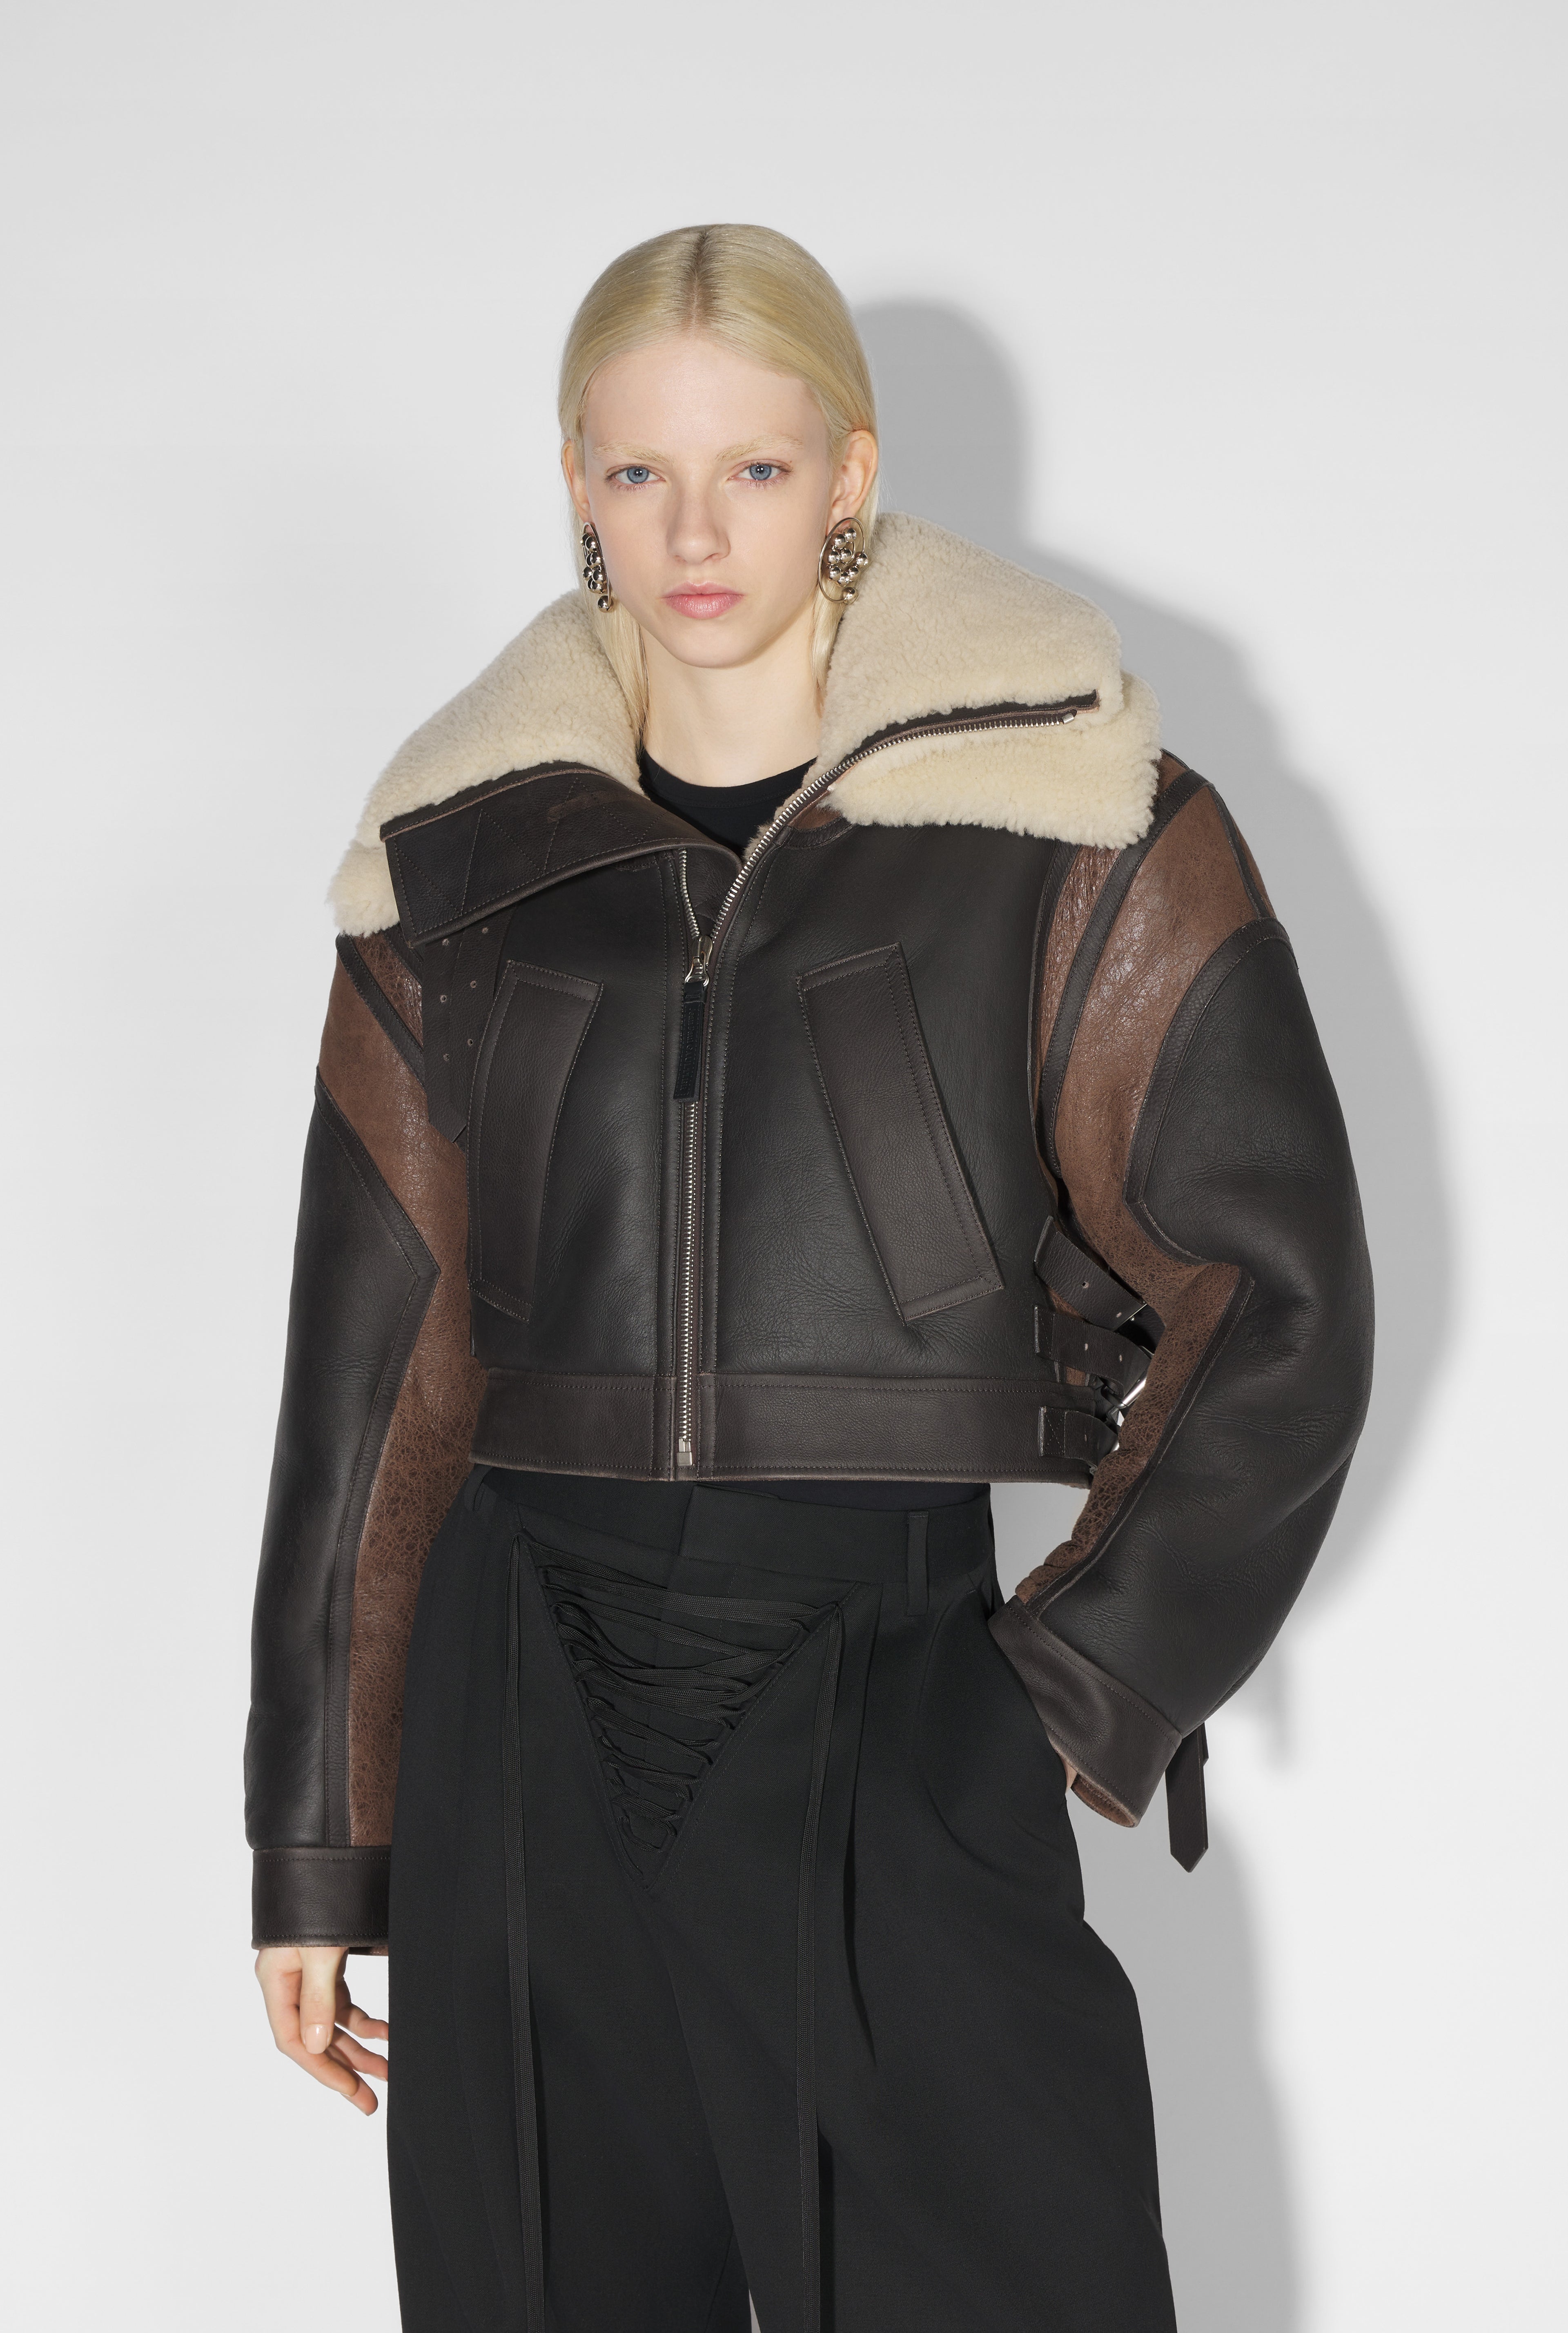 The Leather and Shearling Jacket